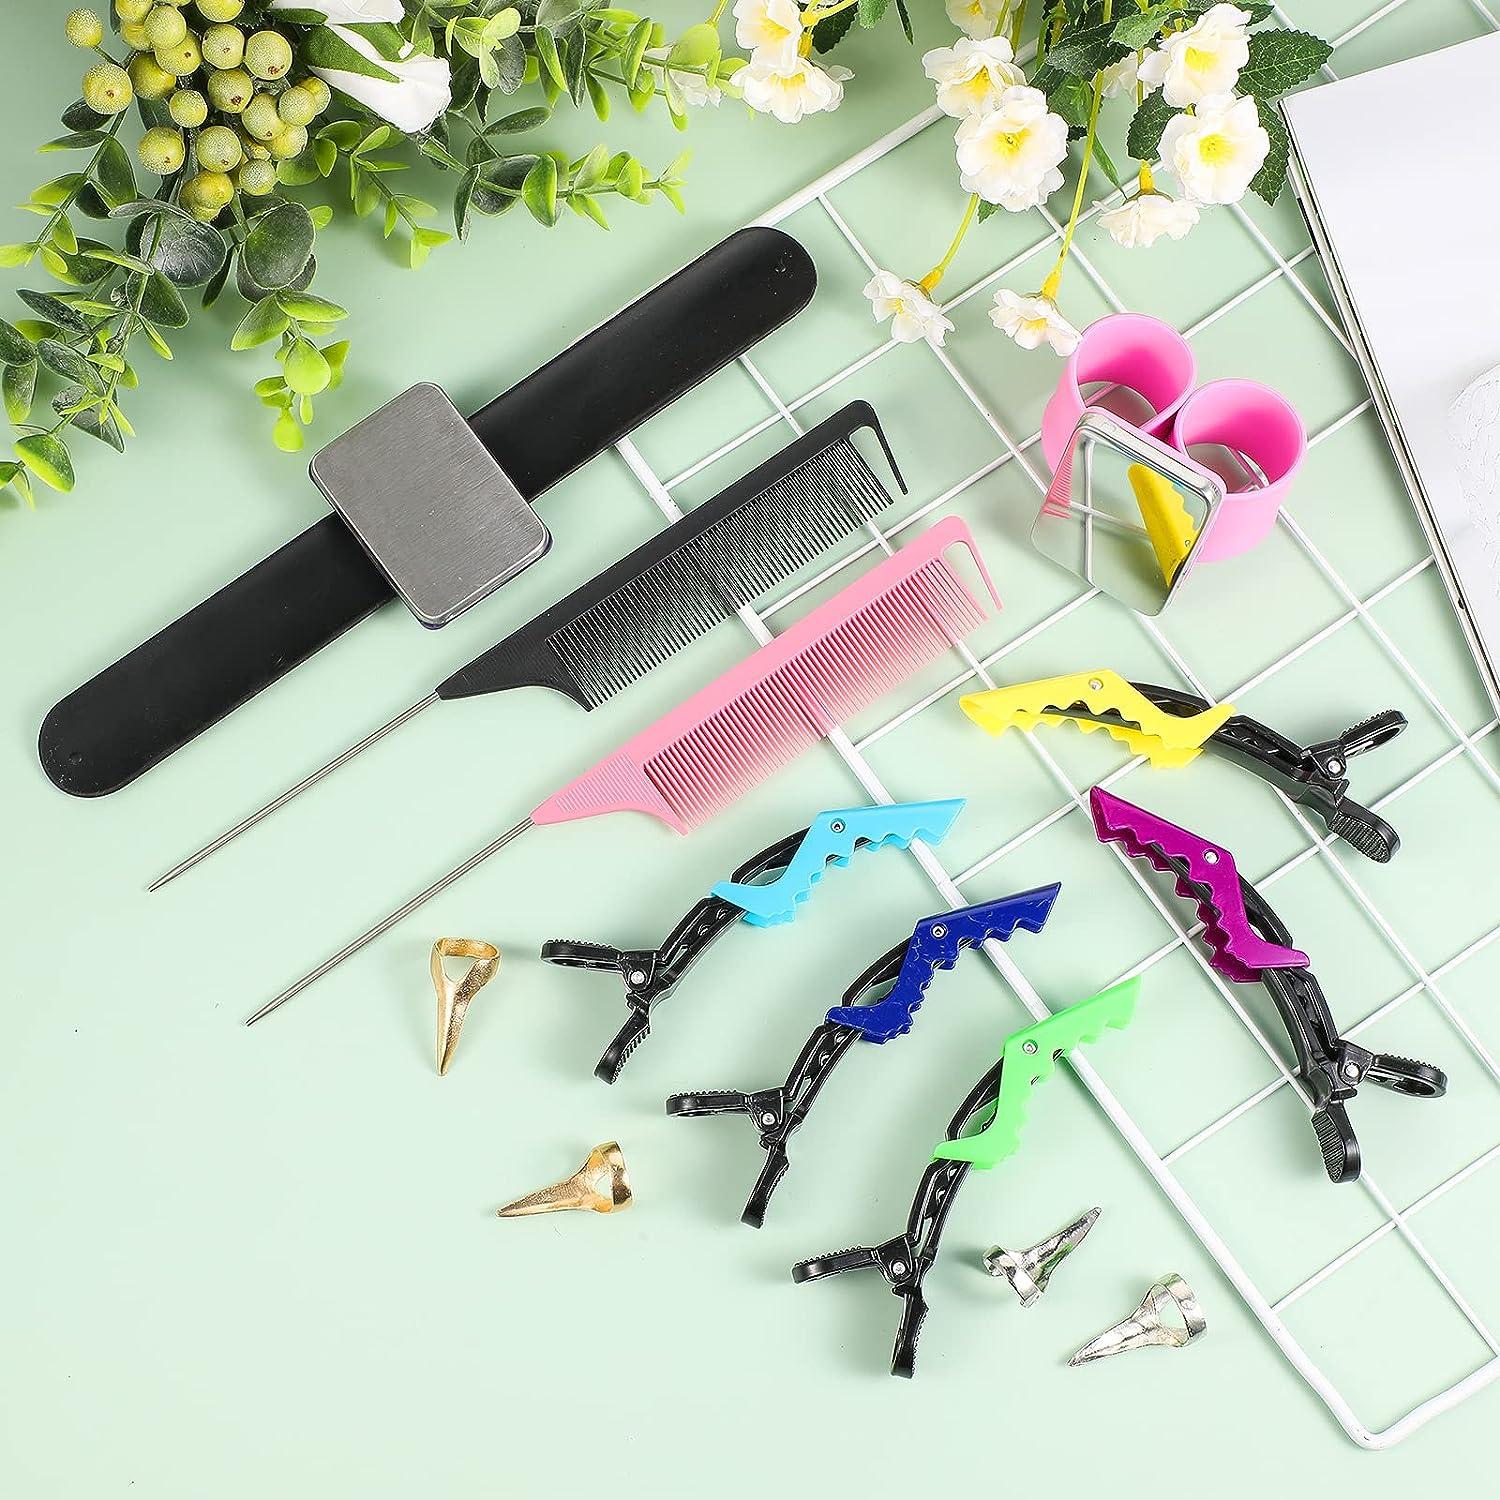 14 Pcs Hair Braiding Tool 2 Pieces Magnetic Pin Wristbandand 4 Pcs Braiding  Comb for Parting with 8 Pcs Wide Teeth Alligator Sectioning Hair Clip for  Hair Braid Tool Braid Maker (Black, Pink)